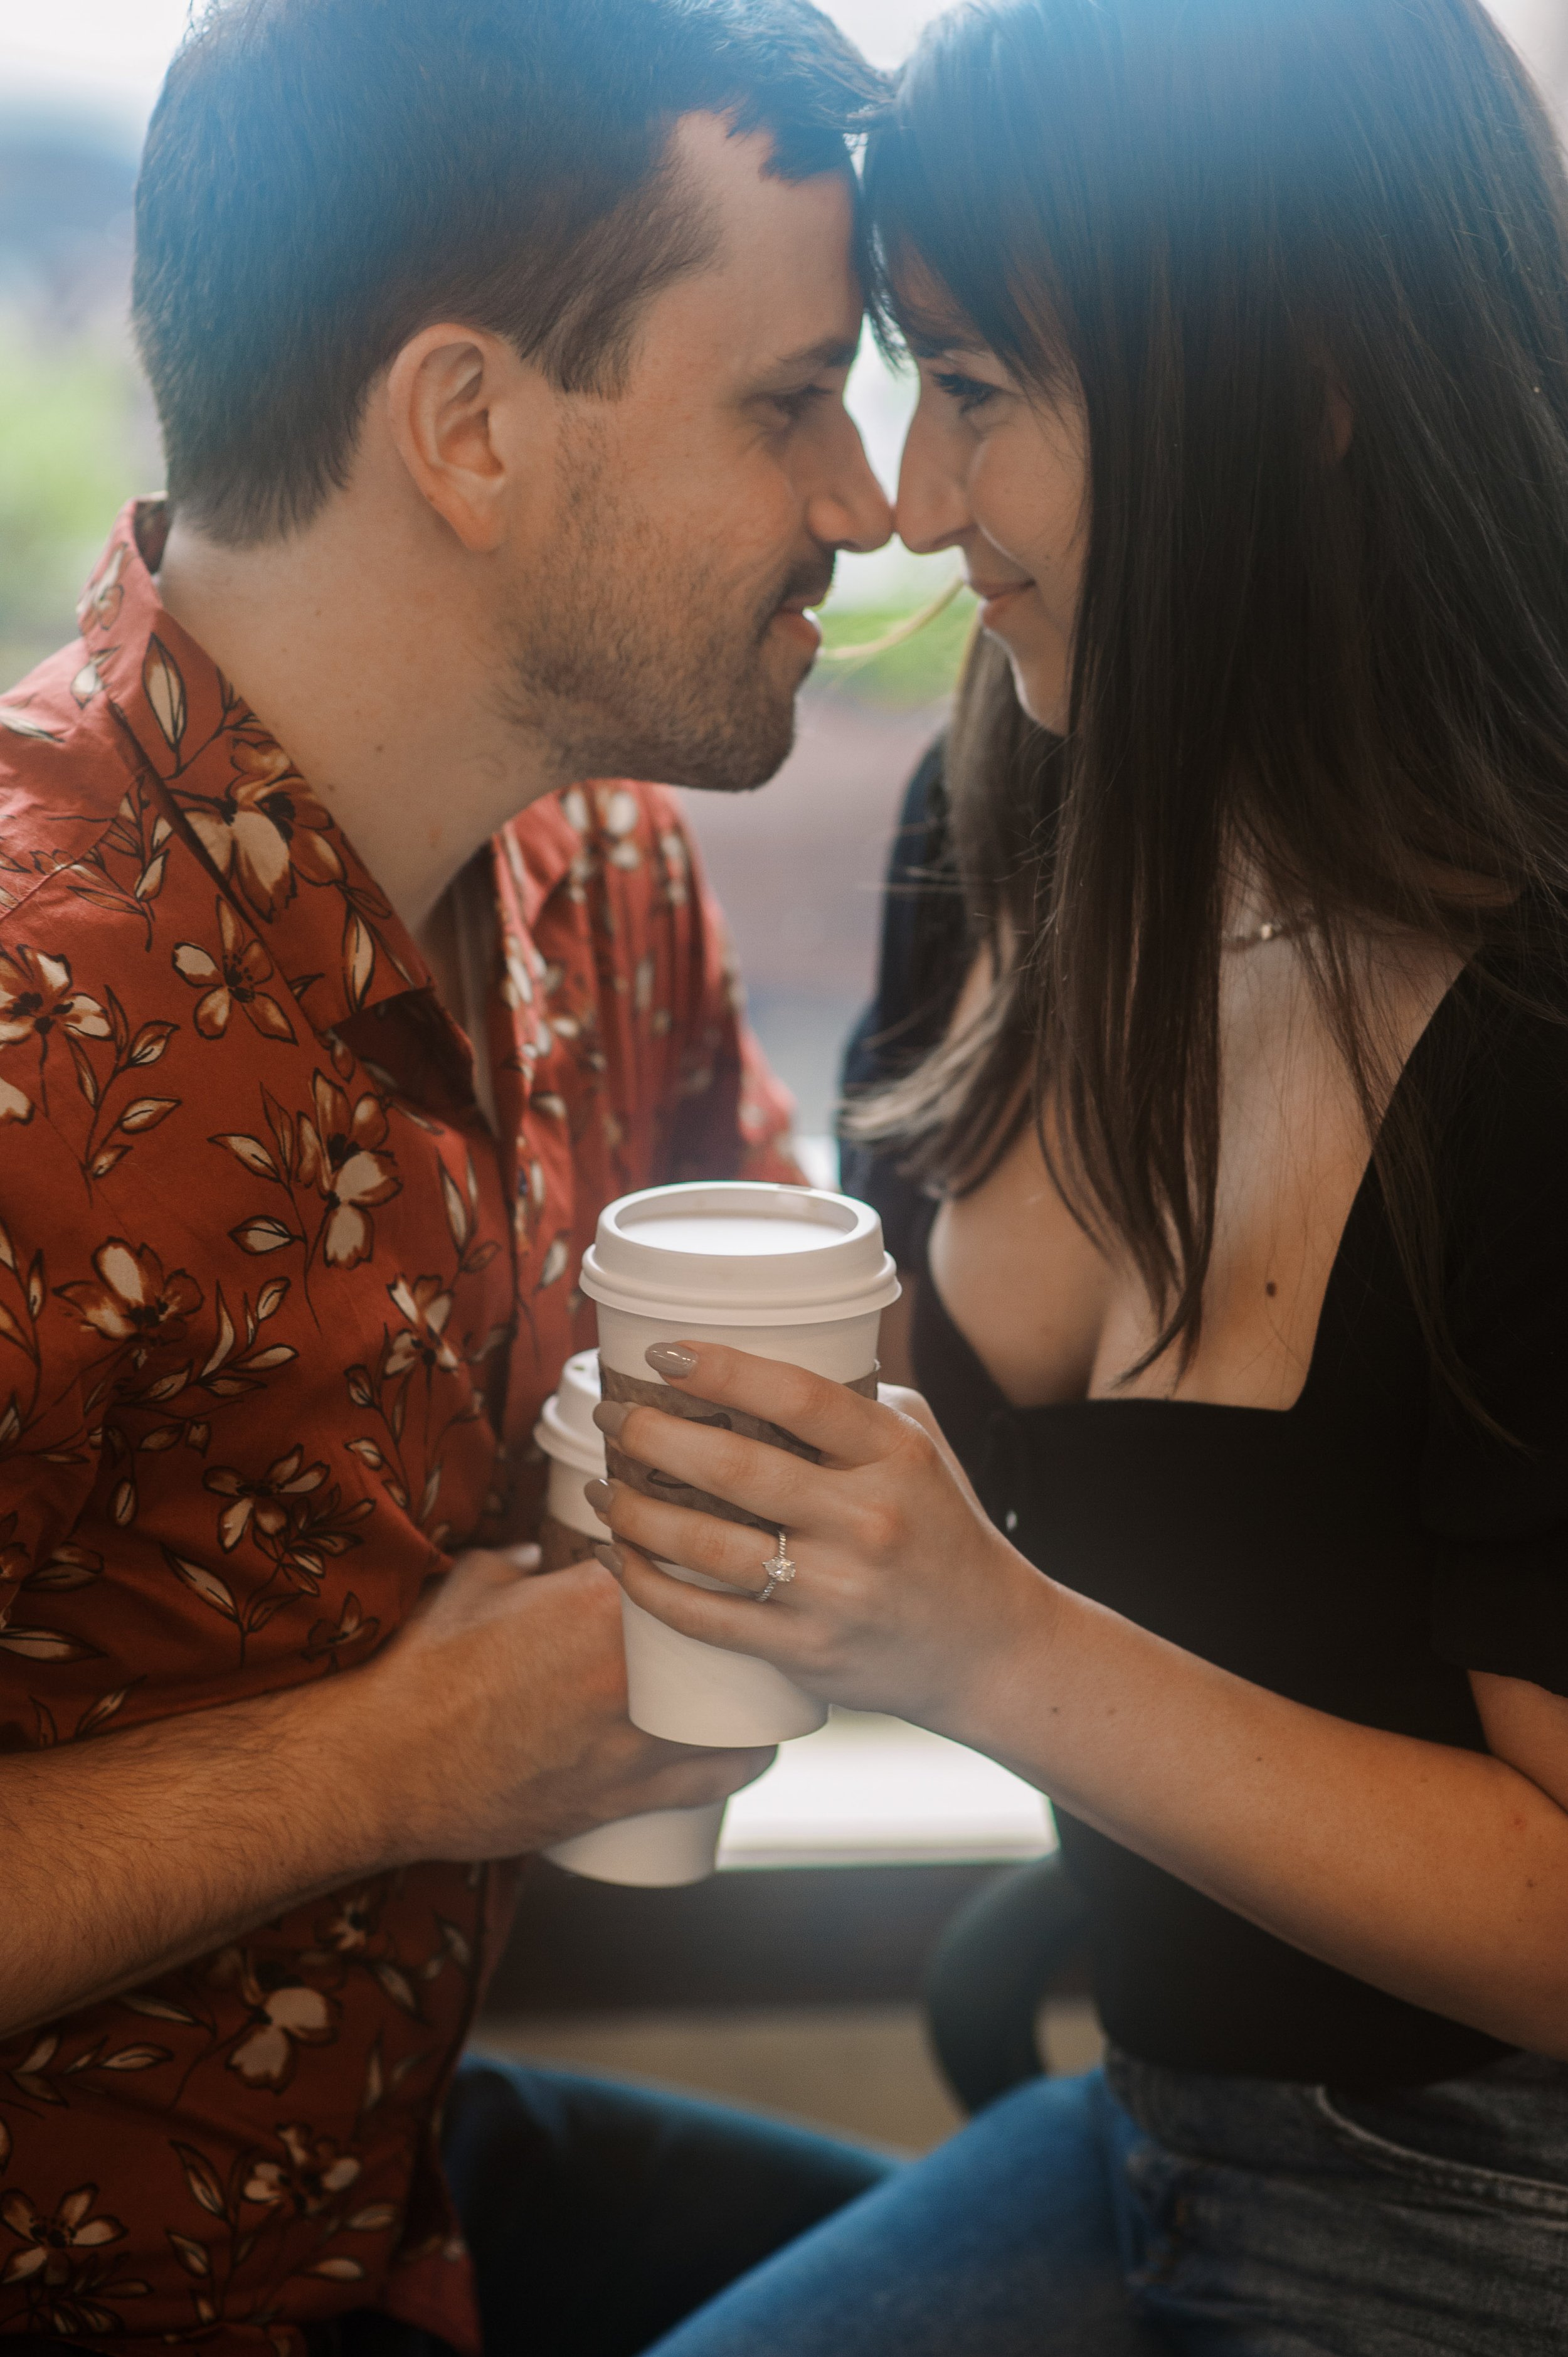 Coffee Engagement Ring Le Caprice DC Cafe Bakery Washington DC Engagement Photos Fancy This Photography